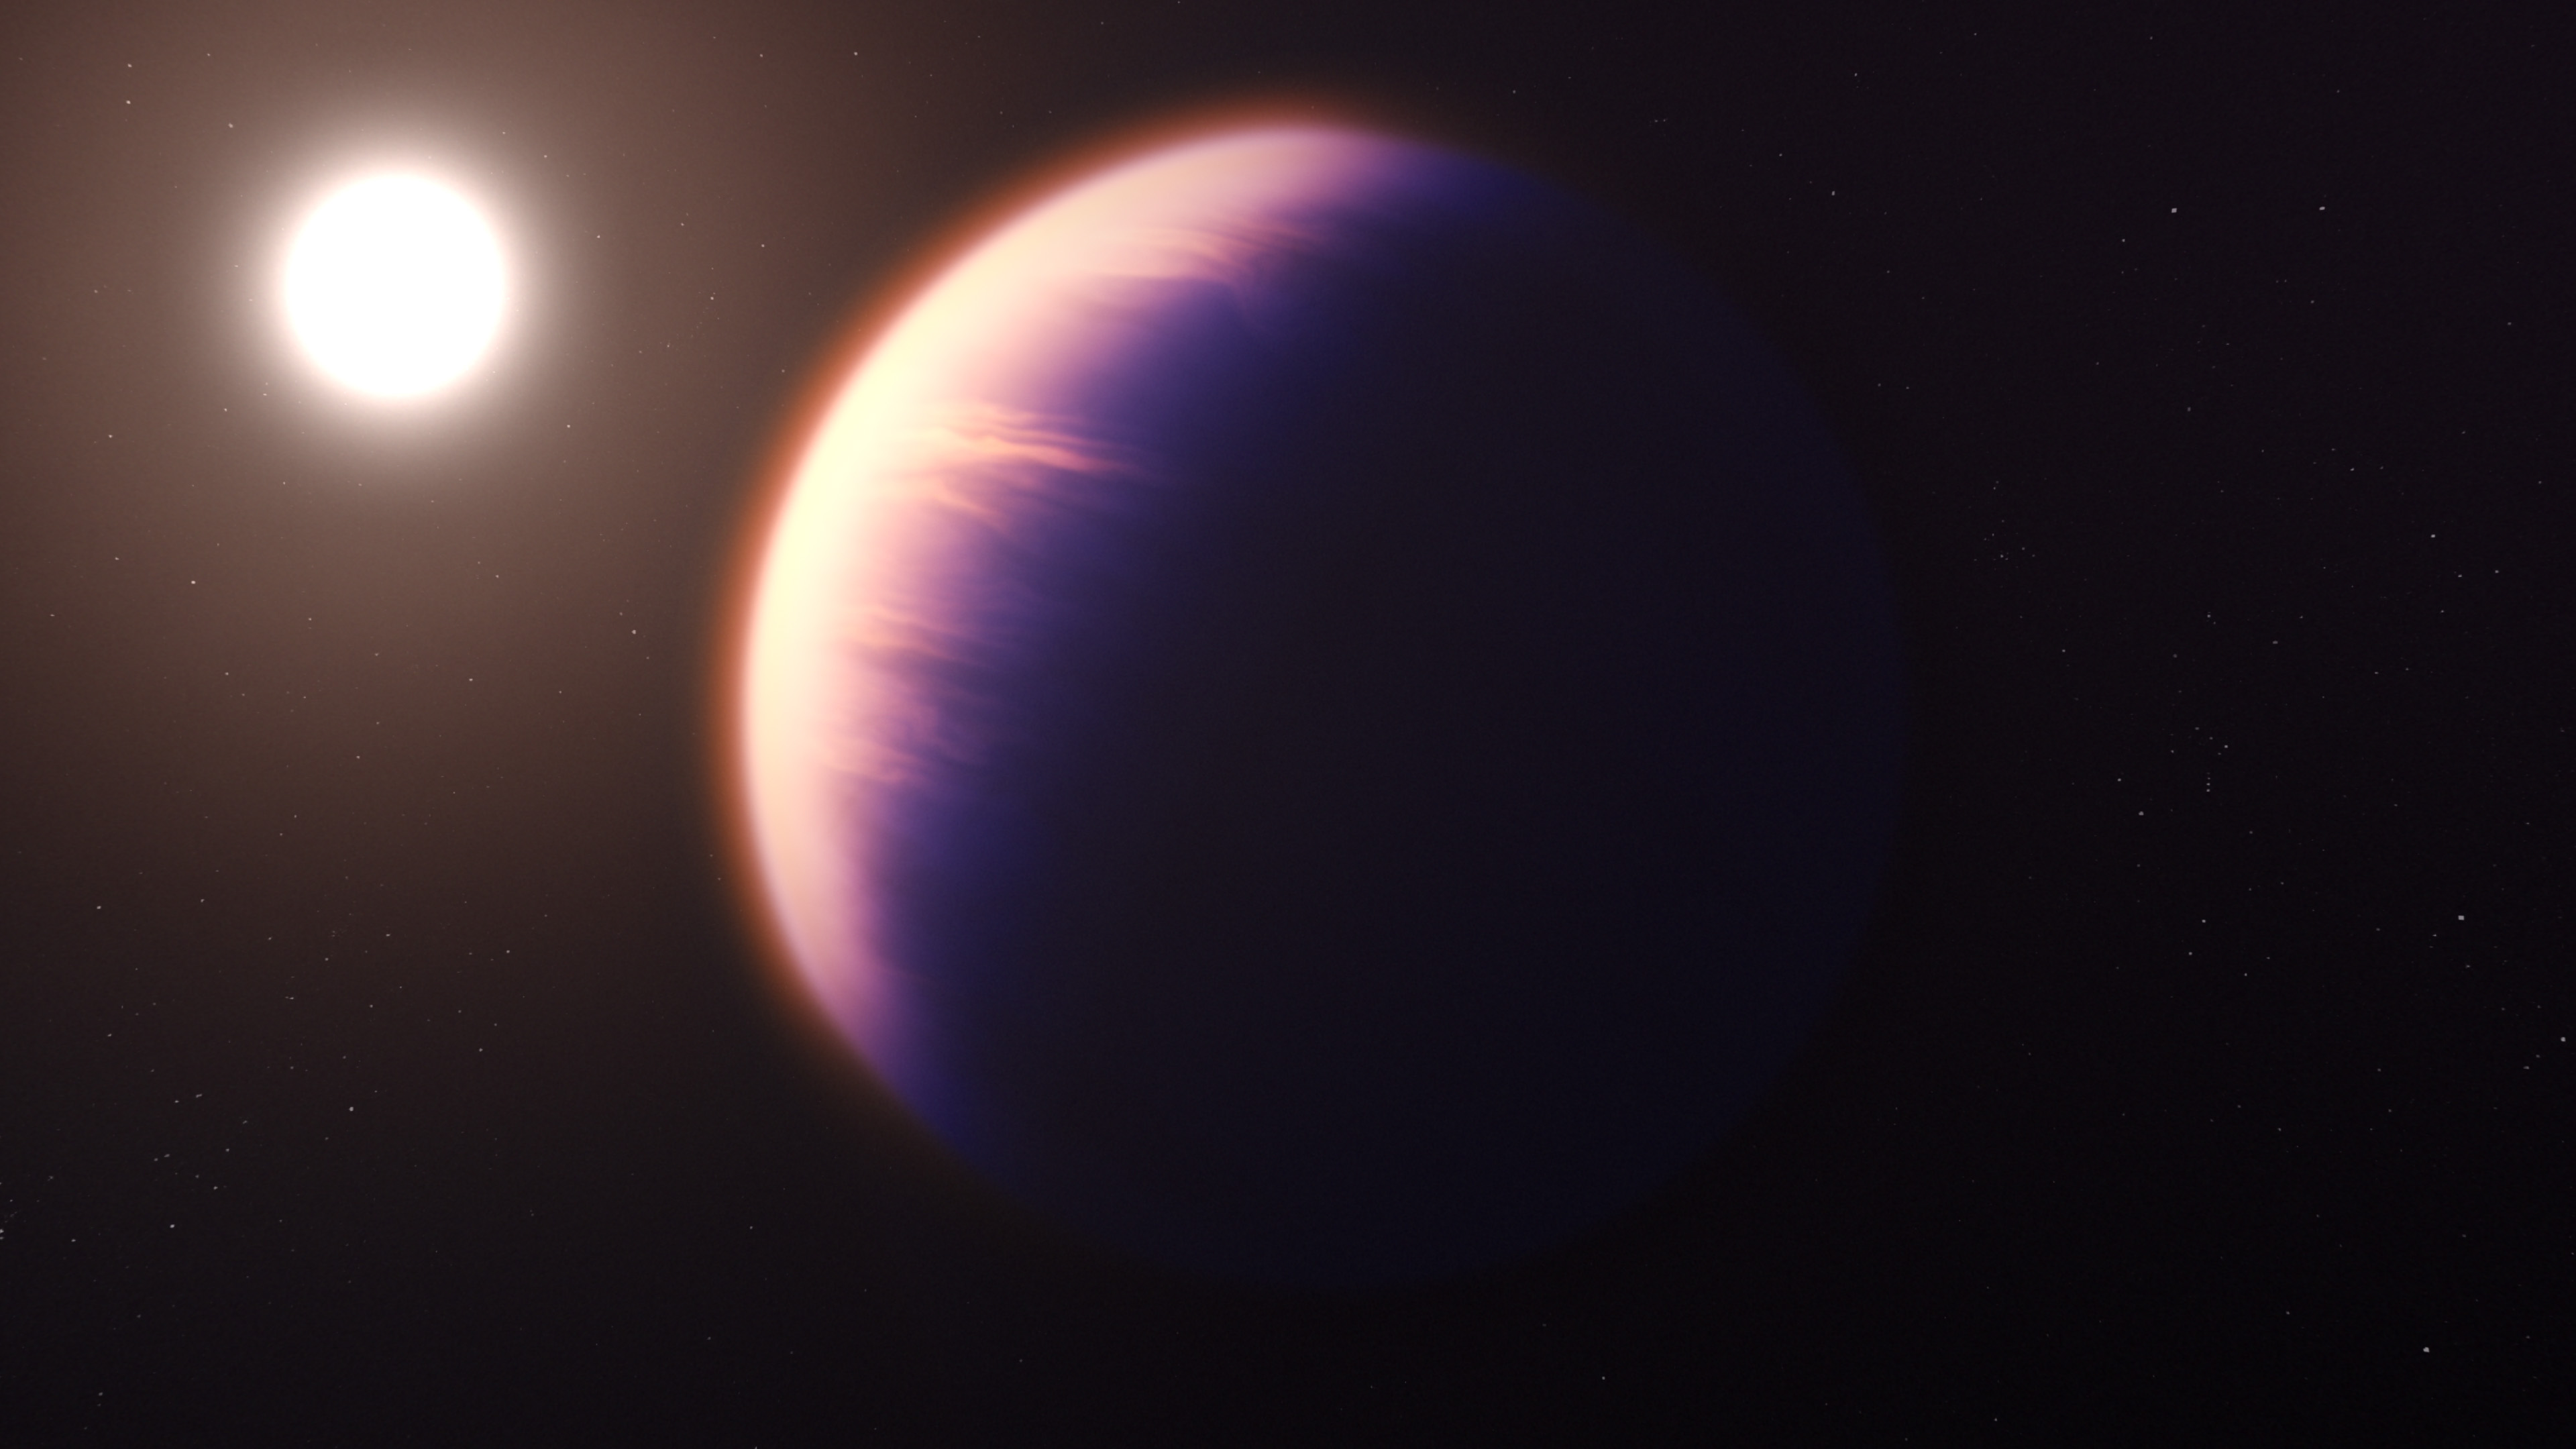 This illustration shows what exoplanet WASP-39 b could look like, based on current understanding of the planet. Data collected by JWST’s Near-Infrared Spectrograph (NIRSpec) shows unambiguous evidence for carbon dioxide in the atmosphere, while previous observations from NASA’s Hubble and Spitzer Space Telescopes, as well as other telescopes, indicate the presence of water vapor, sodium, and potassium. The planet probably has clouds and some form of weather, but it may not have atmospheric bands like those of Jupiter and Saturn.This illustration is based on indirect transit observations from JWST as well as other space and ground-based telescopes. JWST has not captured a direct image of this planet